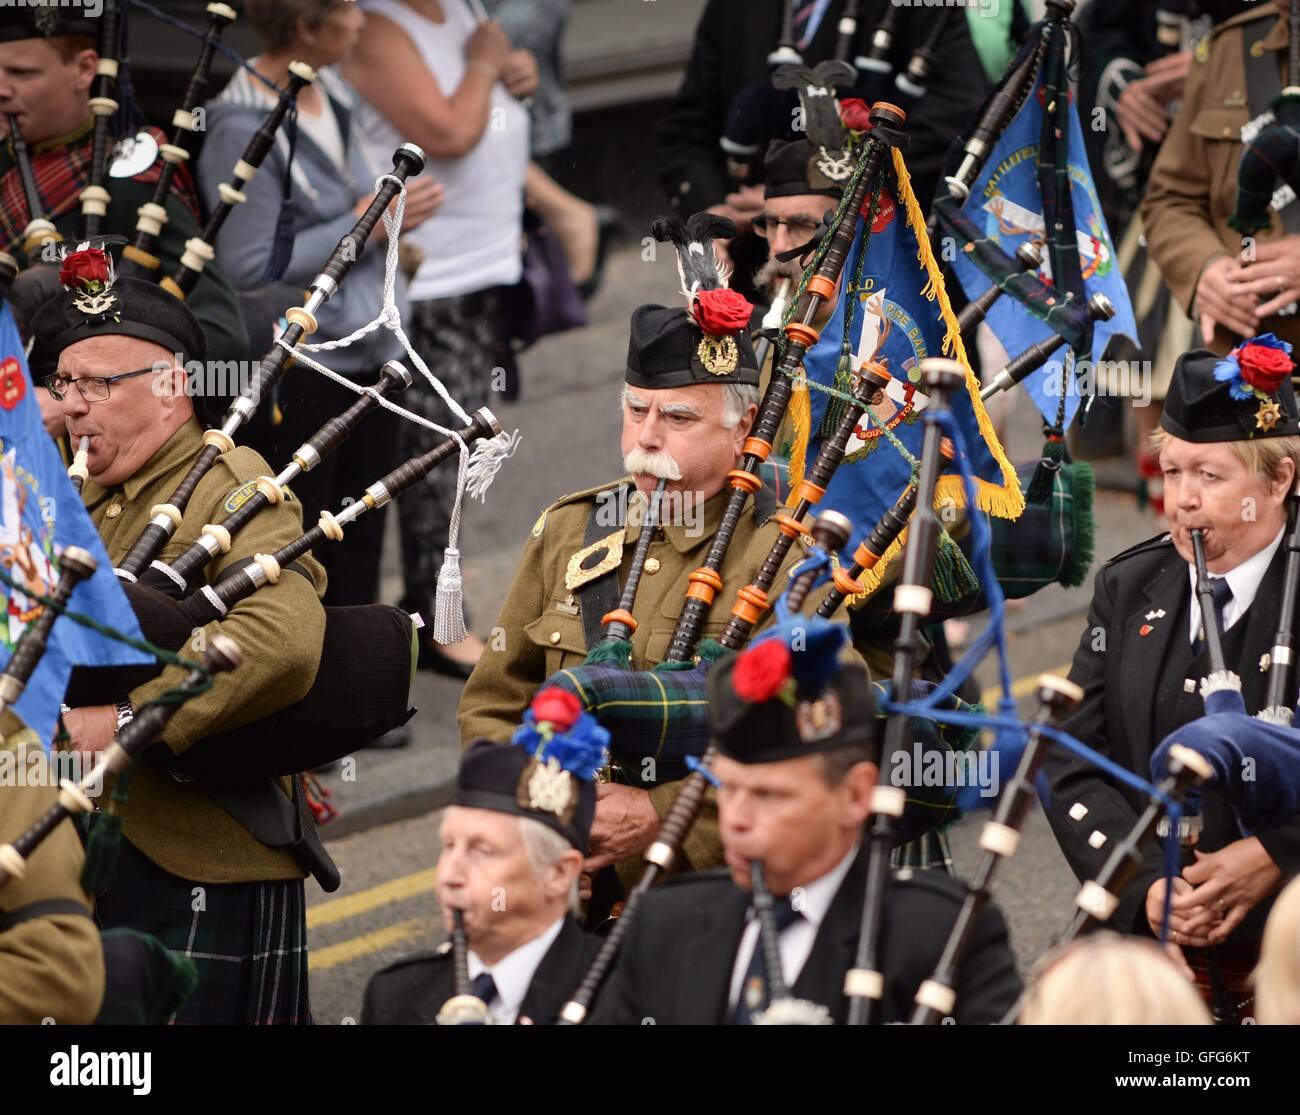 The Kings Own Scottish Borderers association mark Minden Day in Berwick, celebrated as their most auspicious Battle Honour. Stock Photo